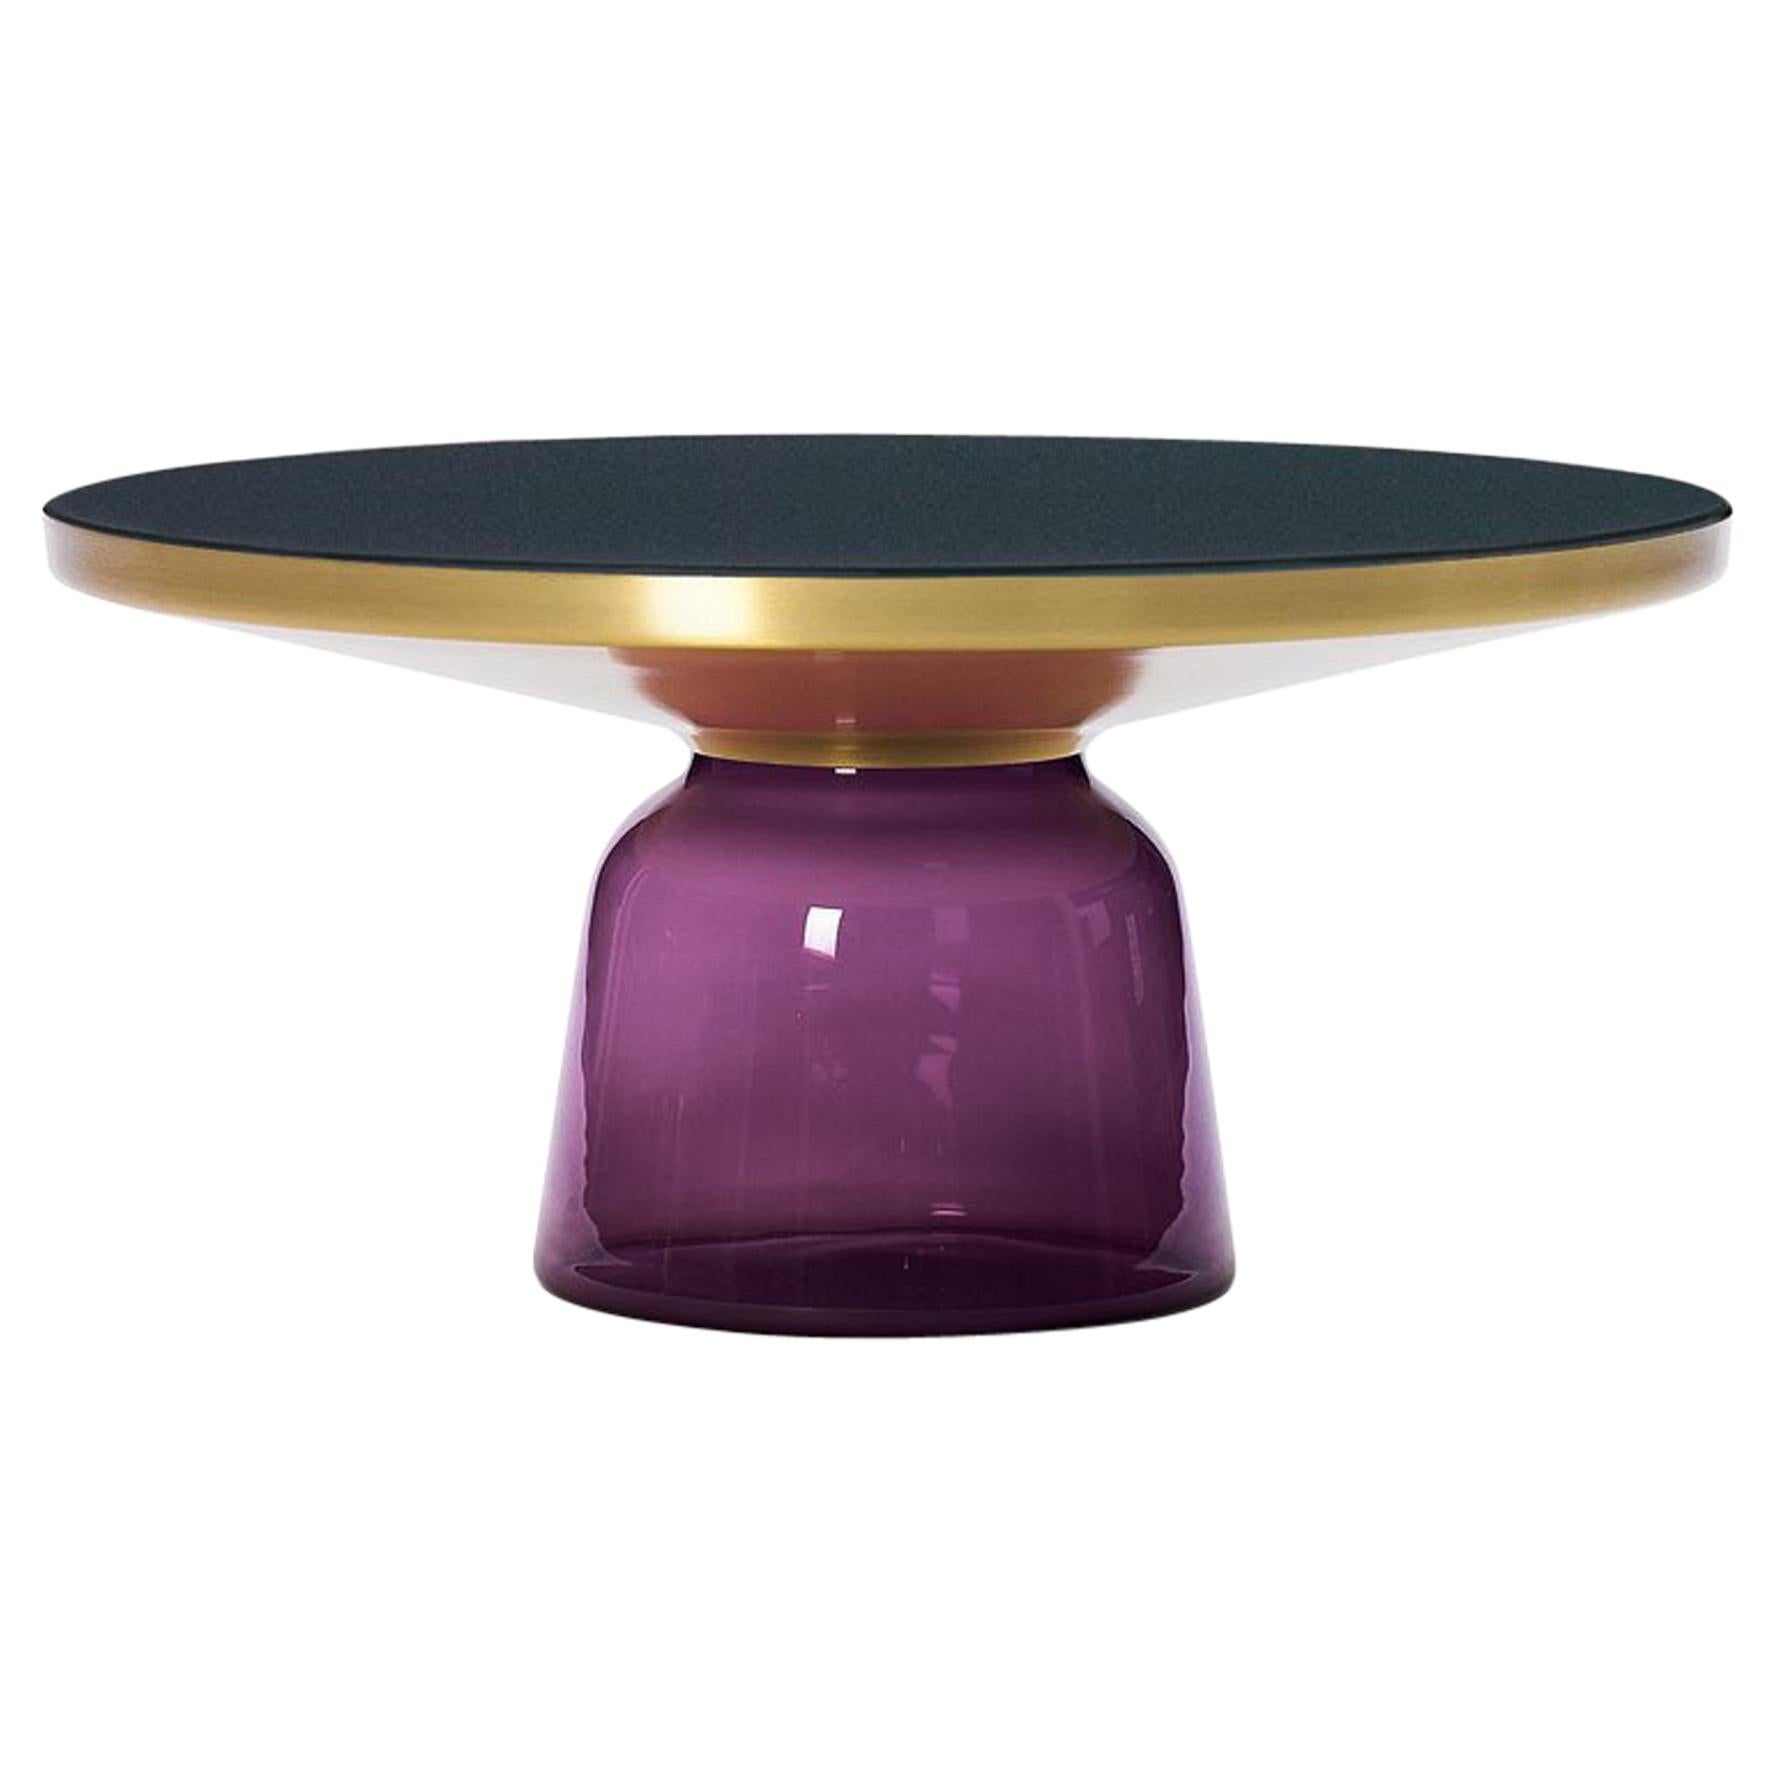 ClassiCon Bell Coffee Table in Brass and Amethyst Violet by Sebastian Herkner